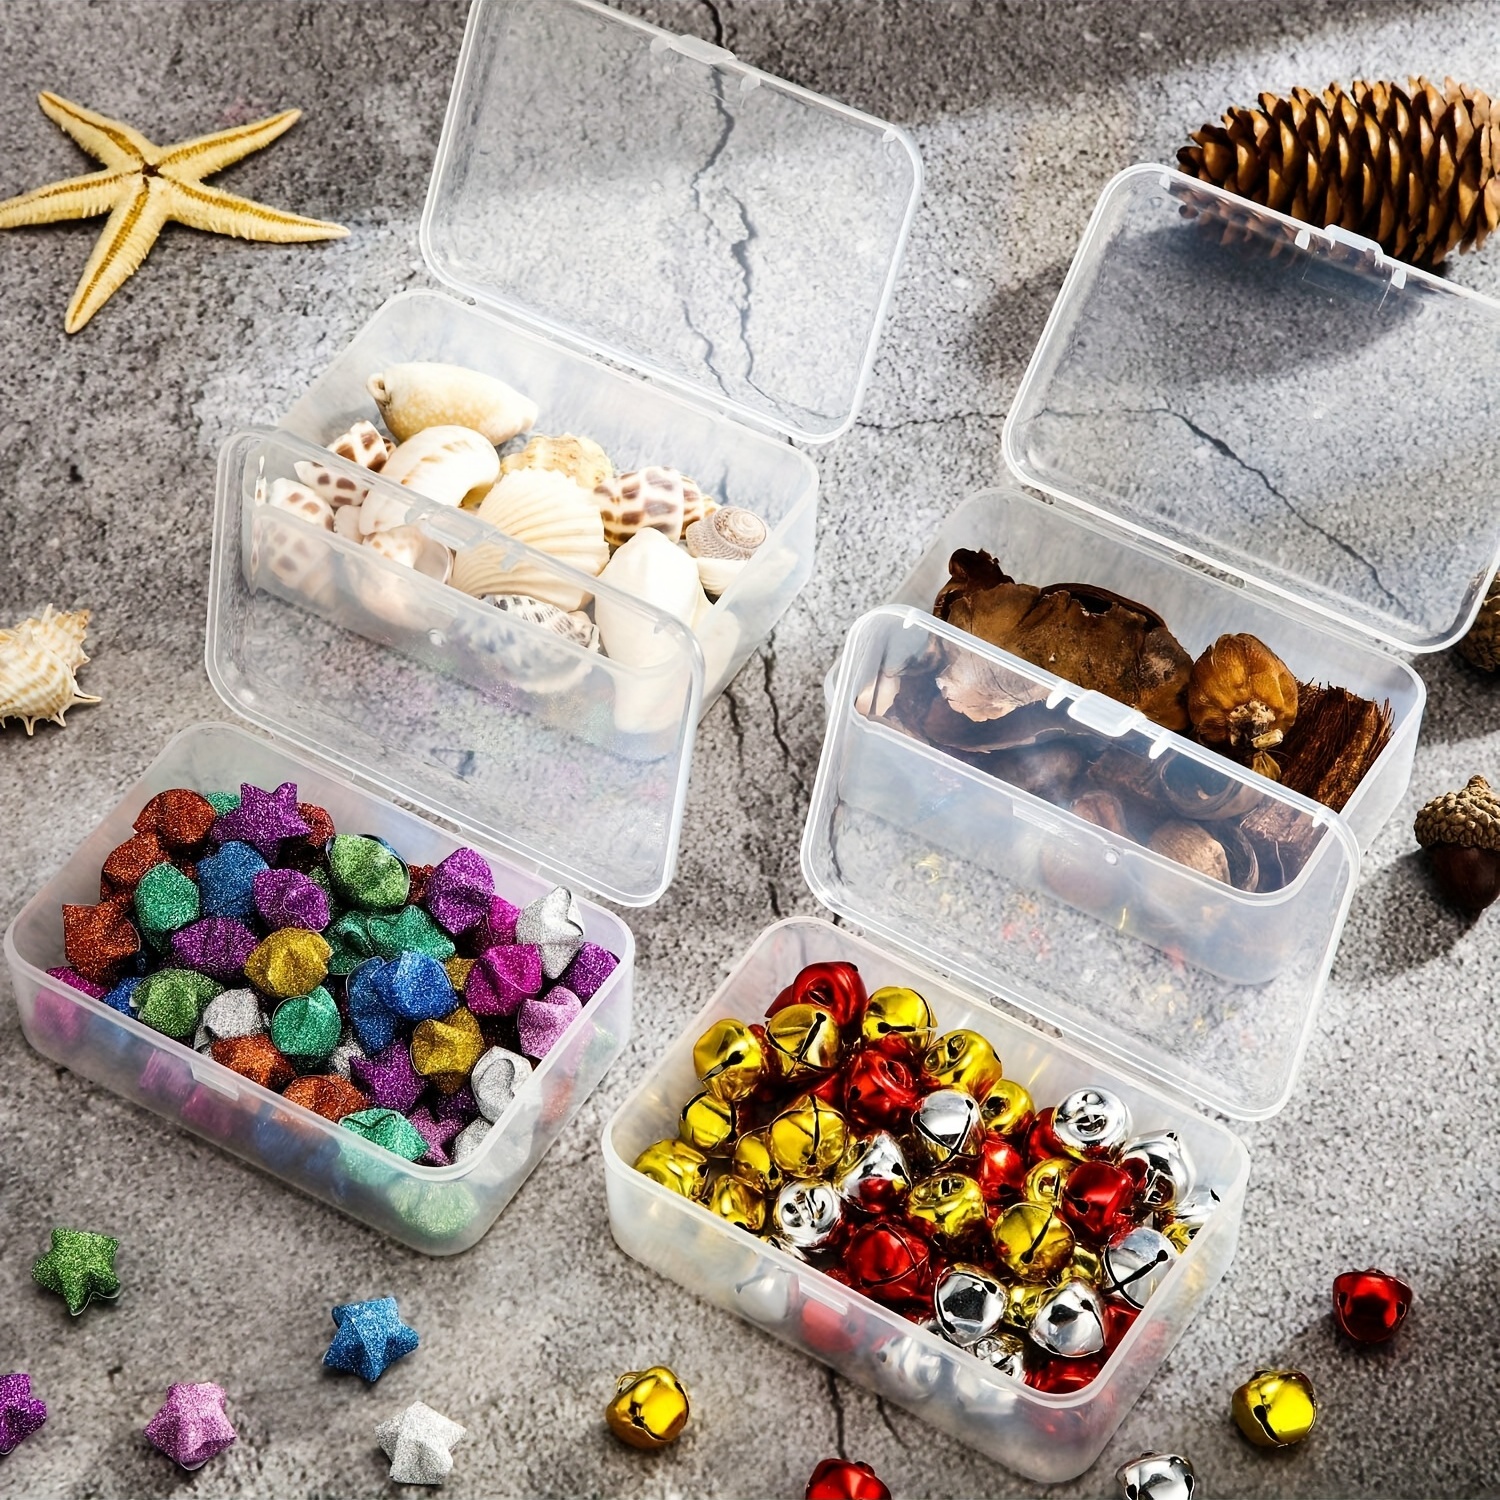 12Pcs Plastic Storage Containers Boxes With Lid, 8.5x6.1x2.5 Inches Clear  Rectangle Box For Collecting Small Items, Beads, Game Pieces, Business Cards